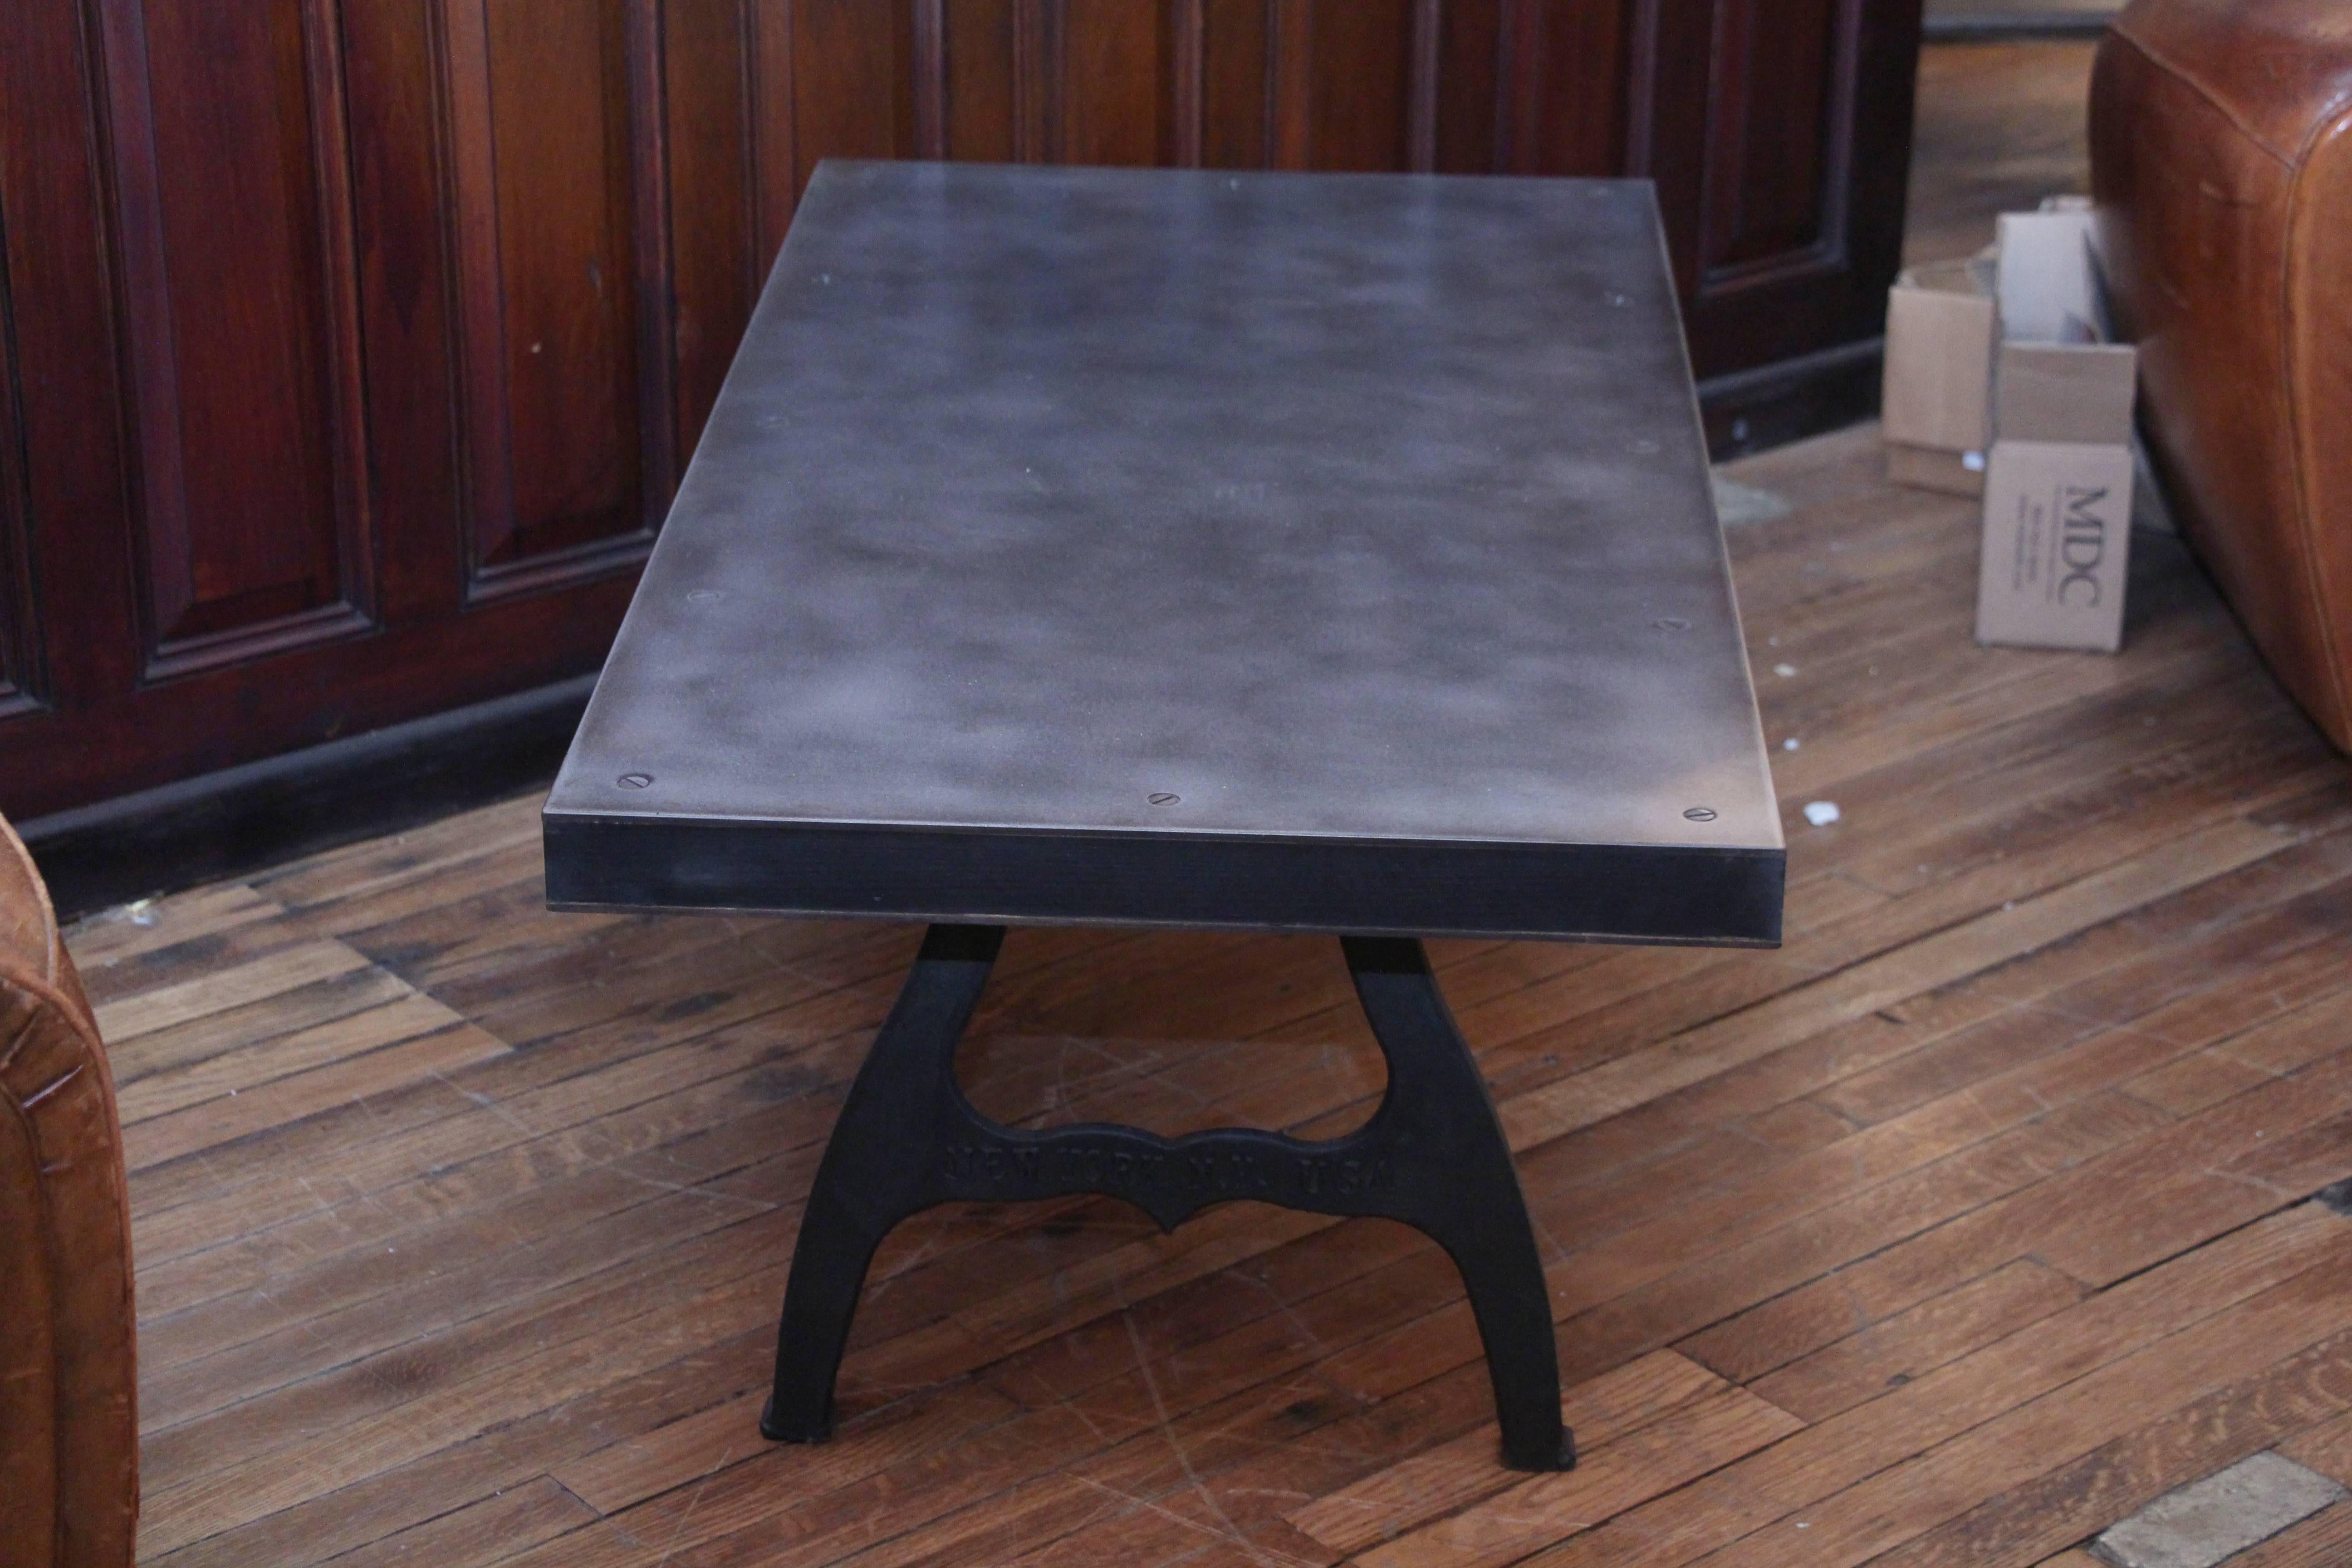 Mid-Century Modern style steel top coffee table with cast iron Industrial legs. Top consists of a 1/4 inch steel top and bottom with a salvaged floor joist core.

Please note each table is custom built and therefore each table varies slightly due to